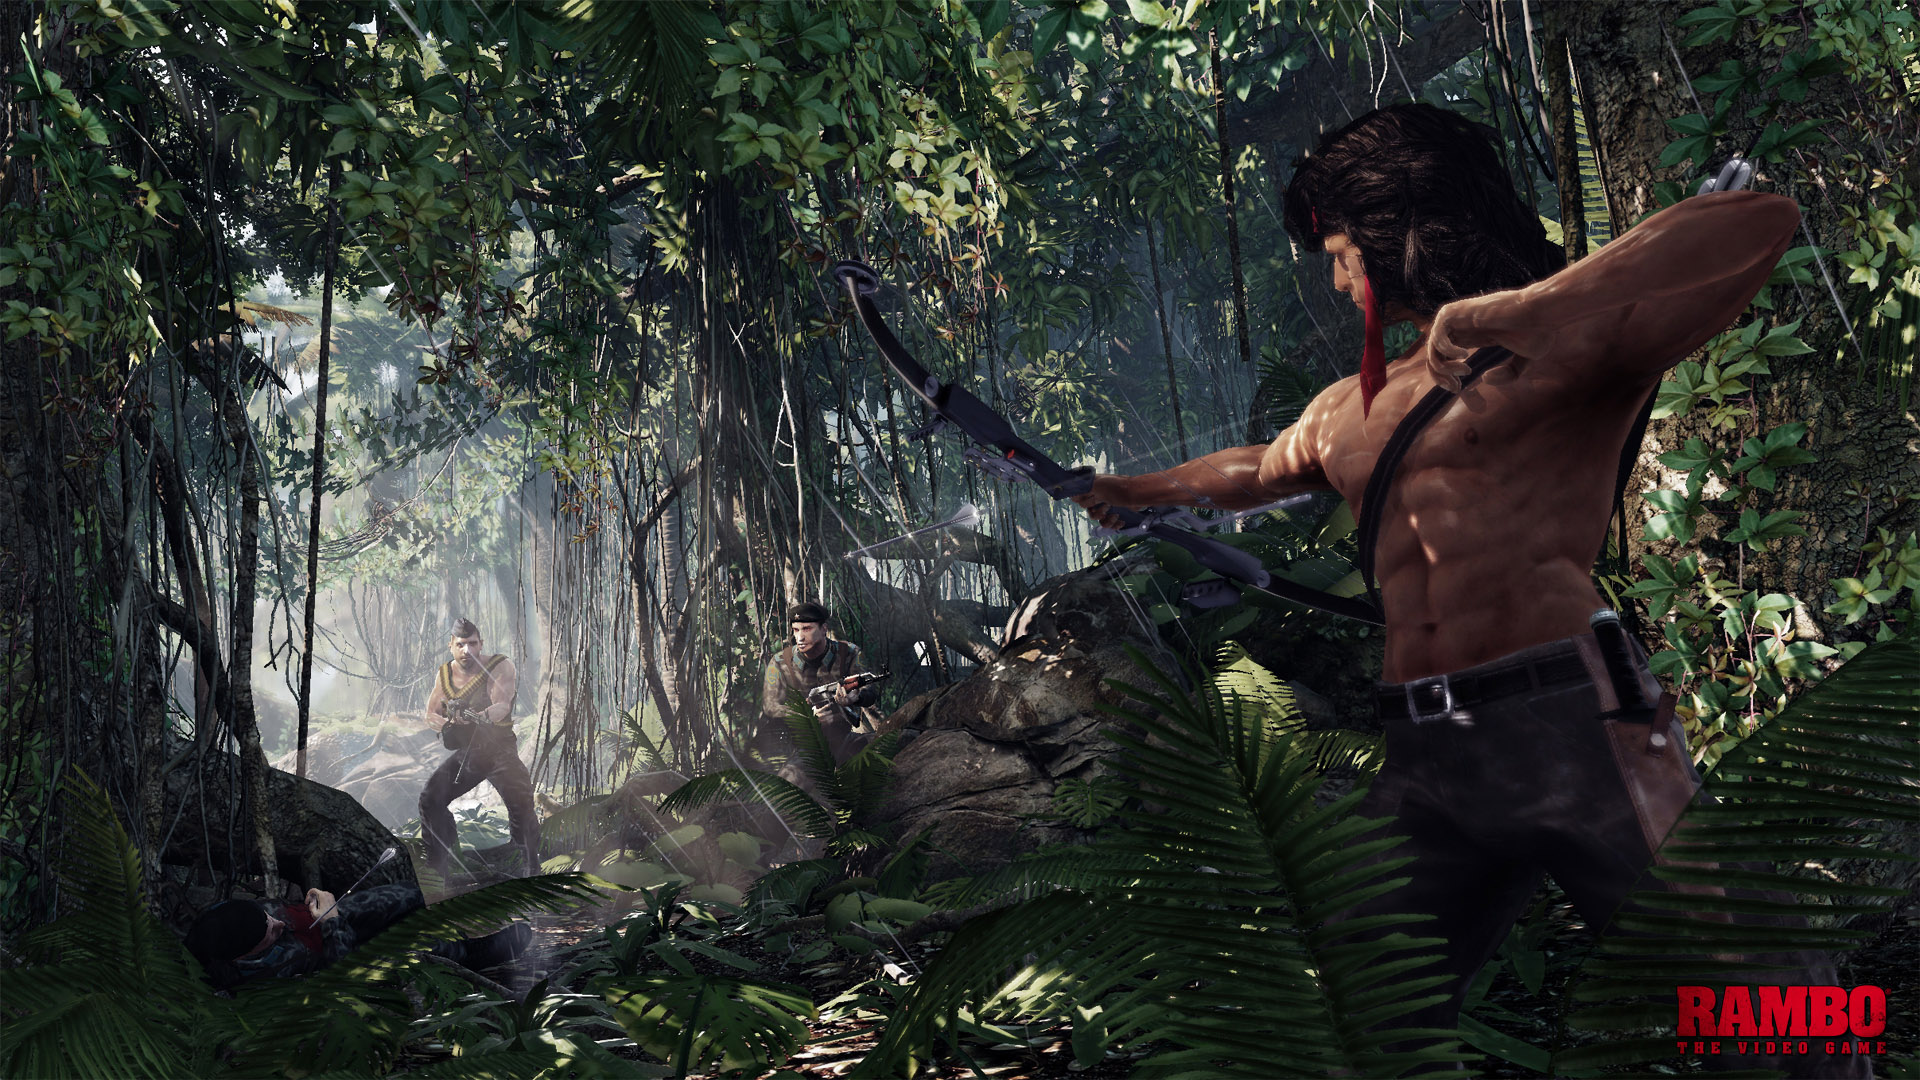 Rambo The Videogame Wallpaper Rambo The Video Game Hd Wallpaper Backgrounds Download